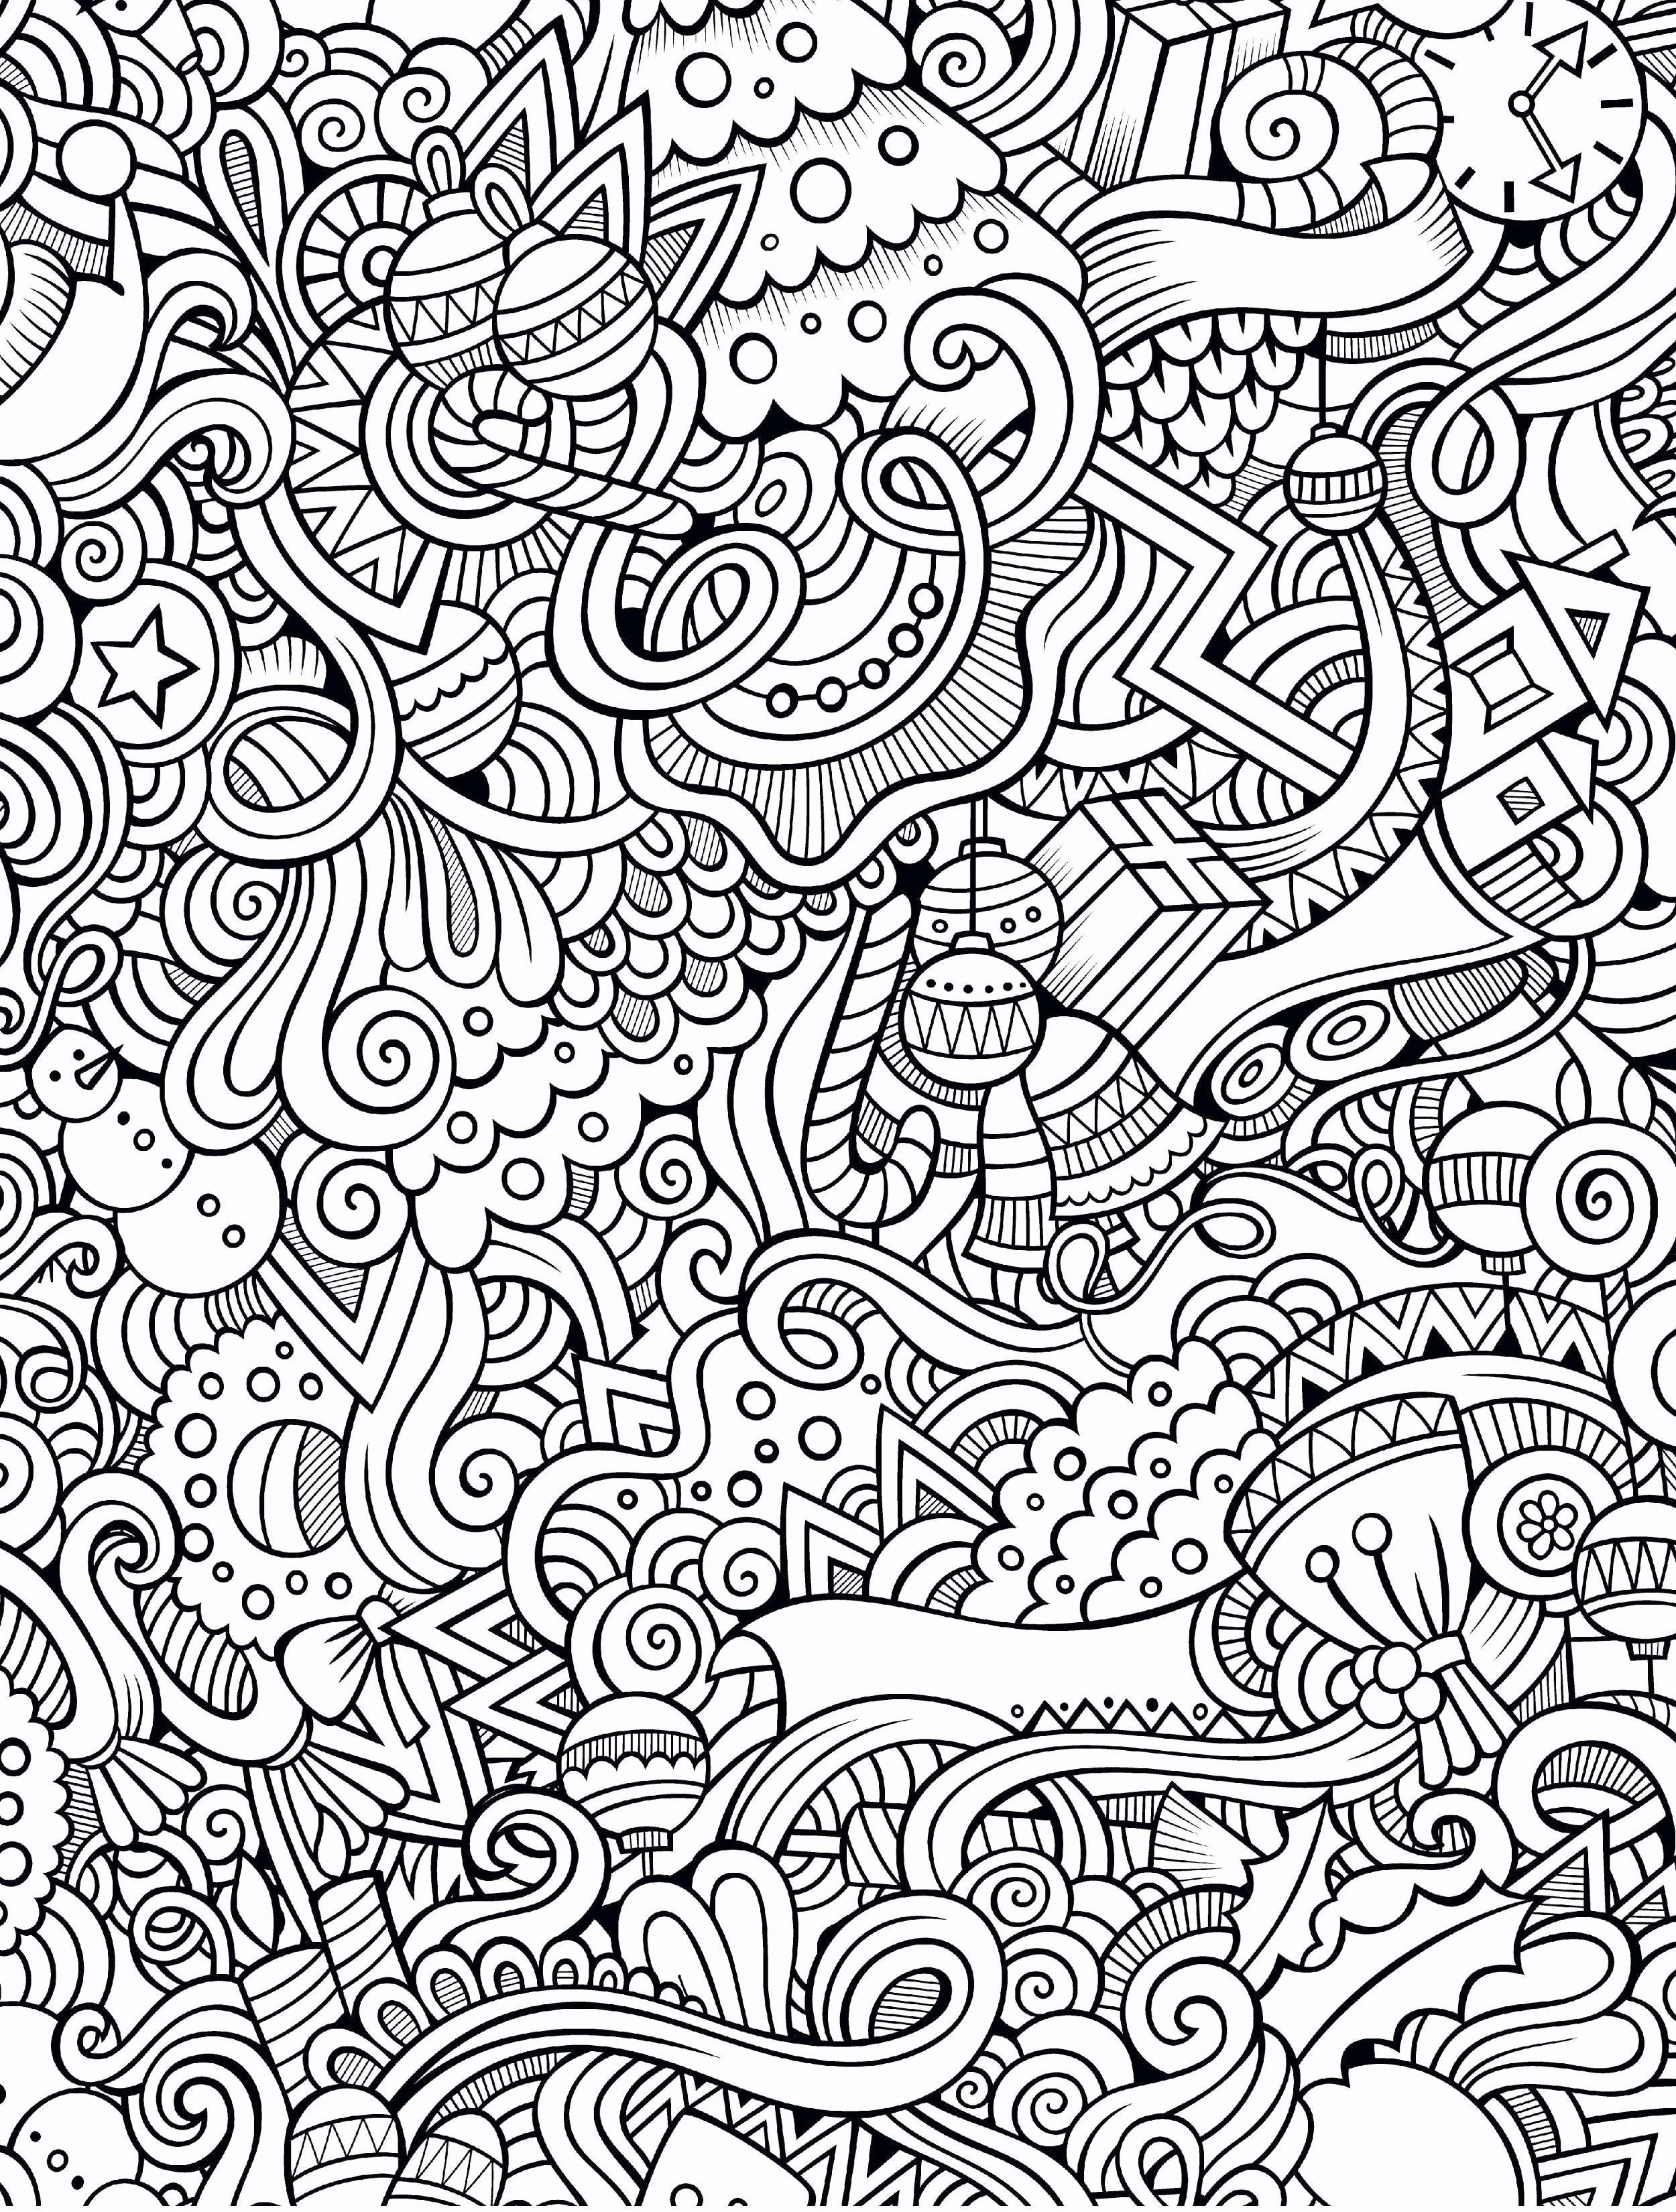 Coloring Pages ~ Free Happy Birthday Coloring Pages For Mom - Free Printable Coloring Cards For Adults